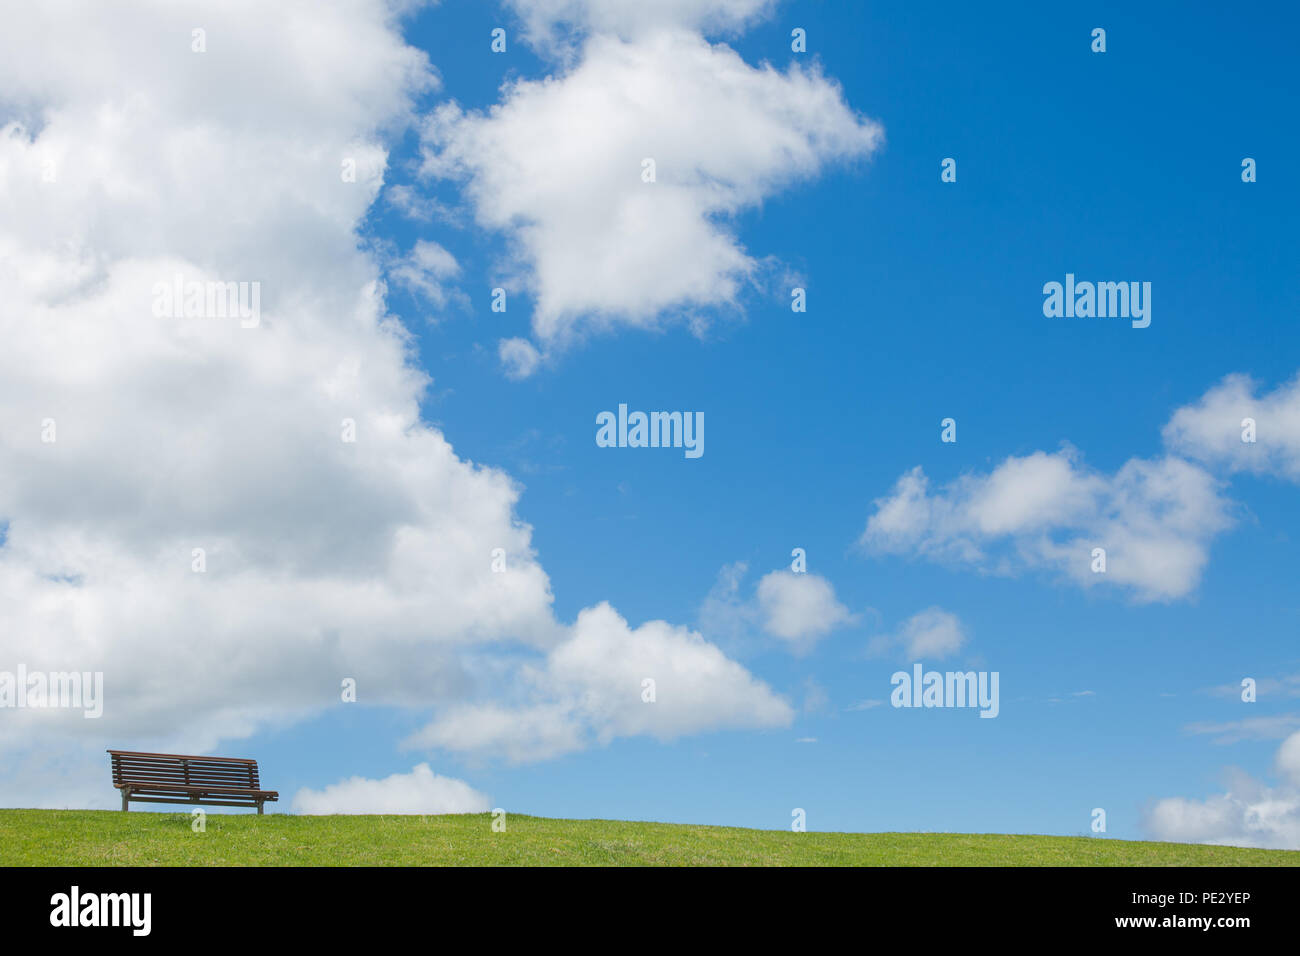 Very small bench in the distance on a grassy bank with a large blue sky and clouds in the background Stock Photo